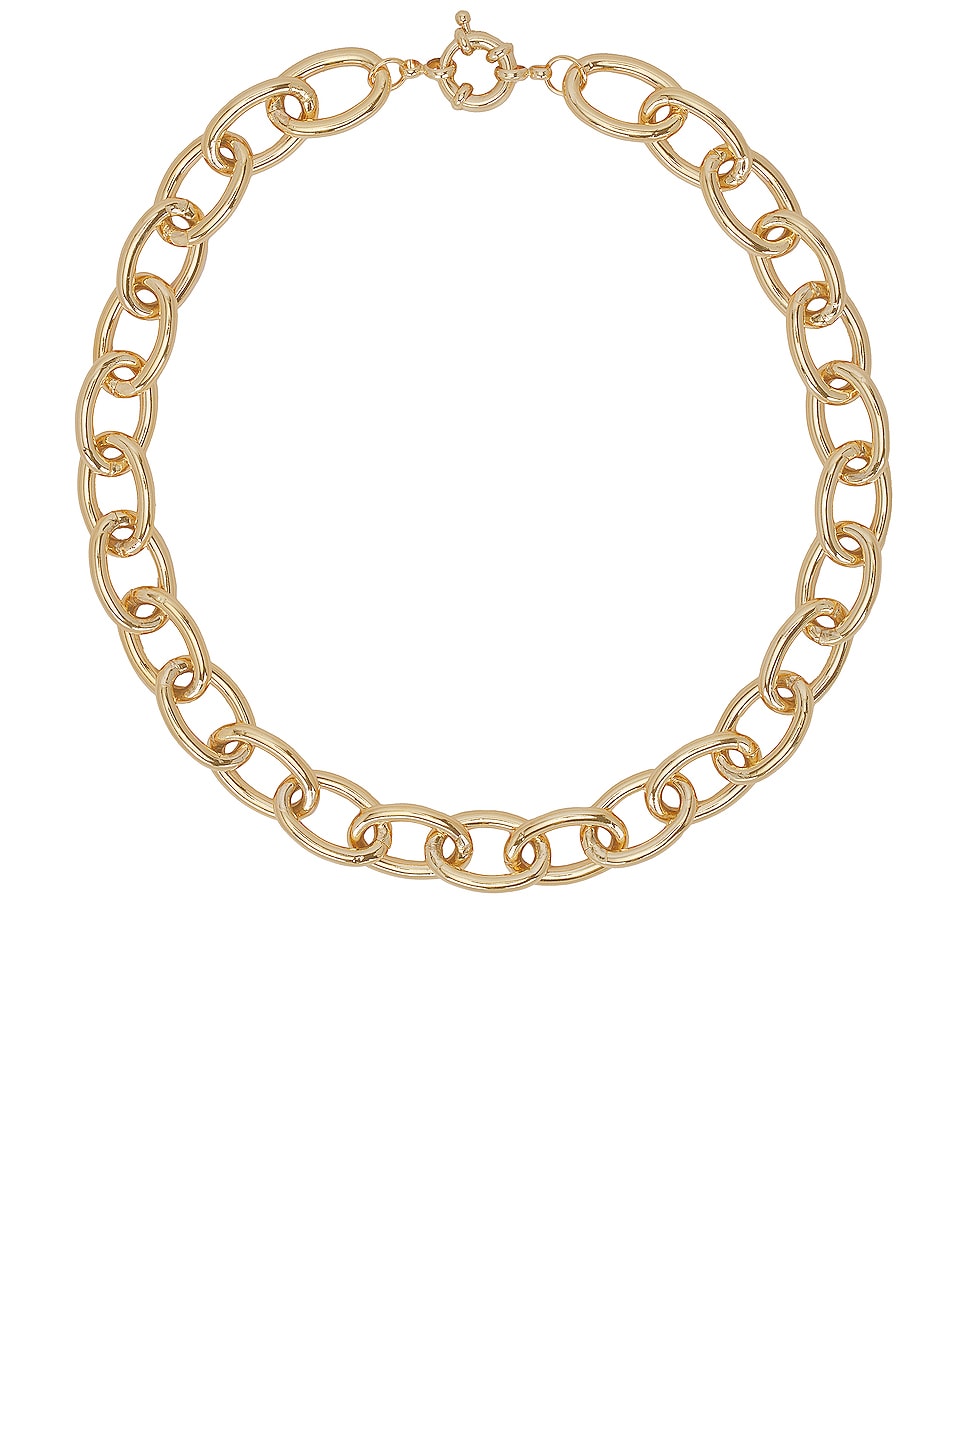 Image 1 of Jordan Road Jewelry Xl Oval Necklace in 18k Gold Plated Brass